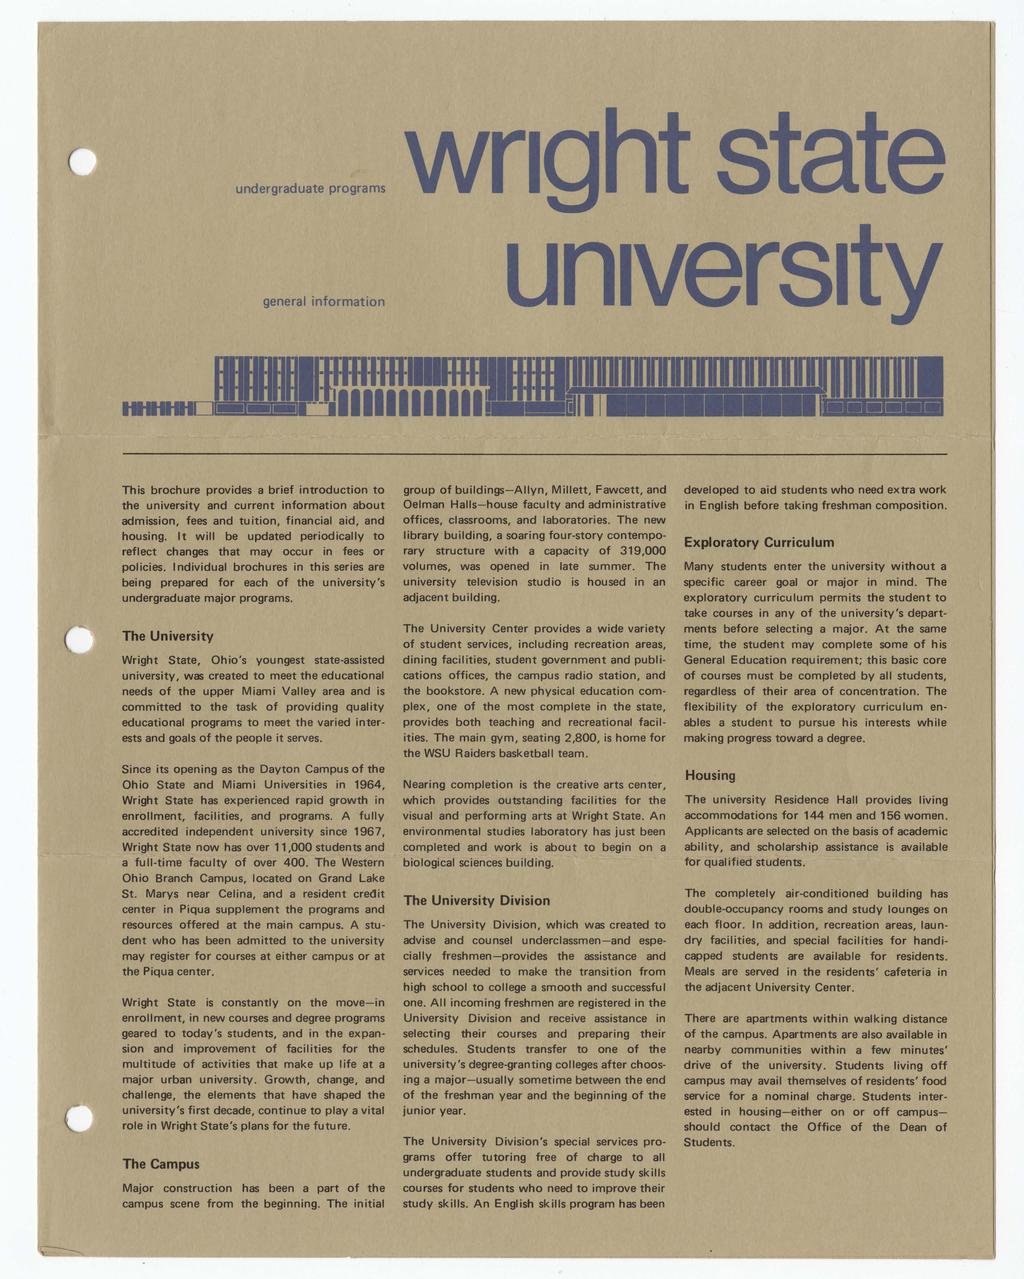 undergraduate programs general information wright state un1vers1ty 11111 This brochure provides a brief introduction to the university and current information about admission, fees and tuition,